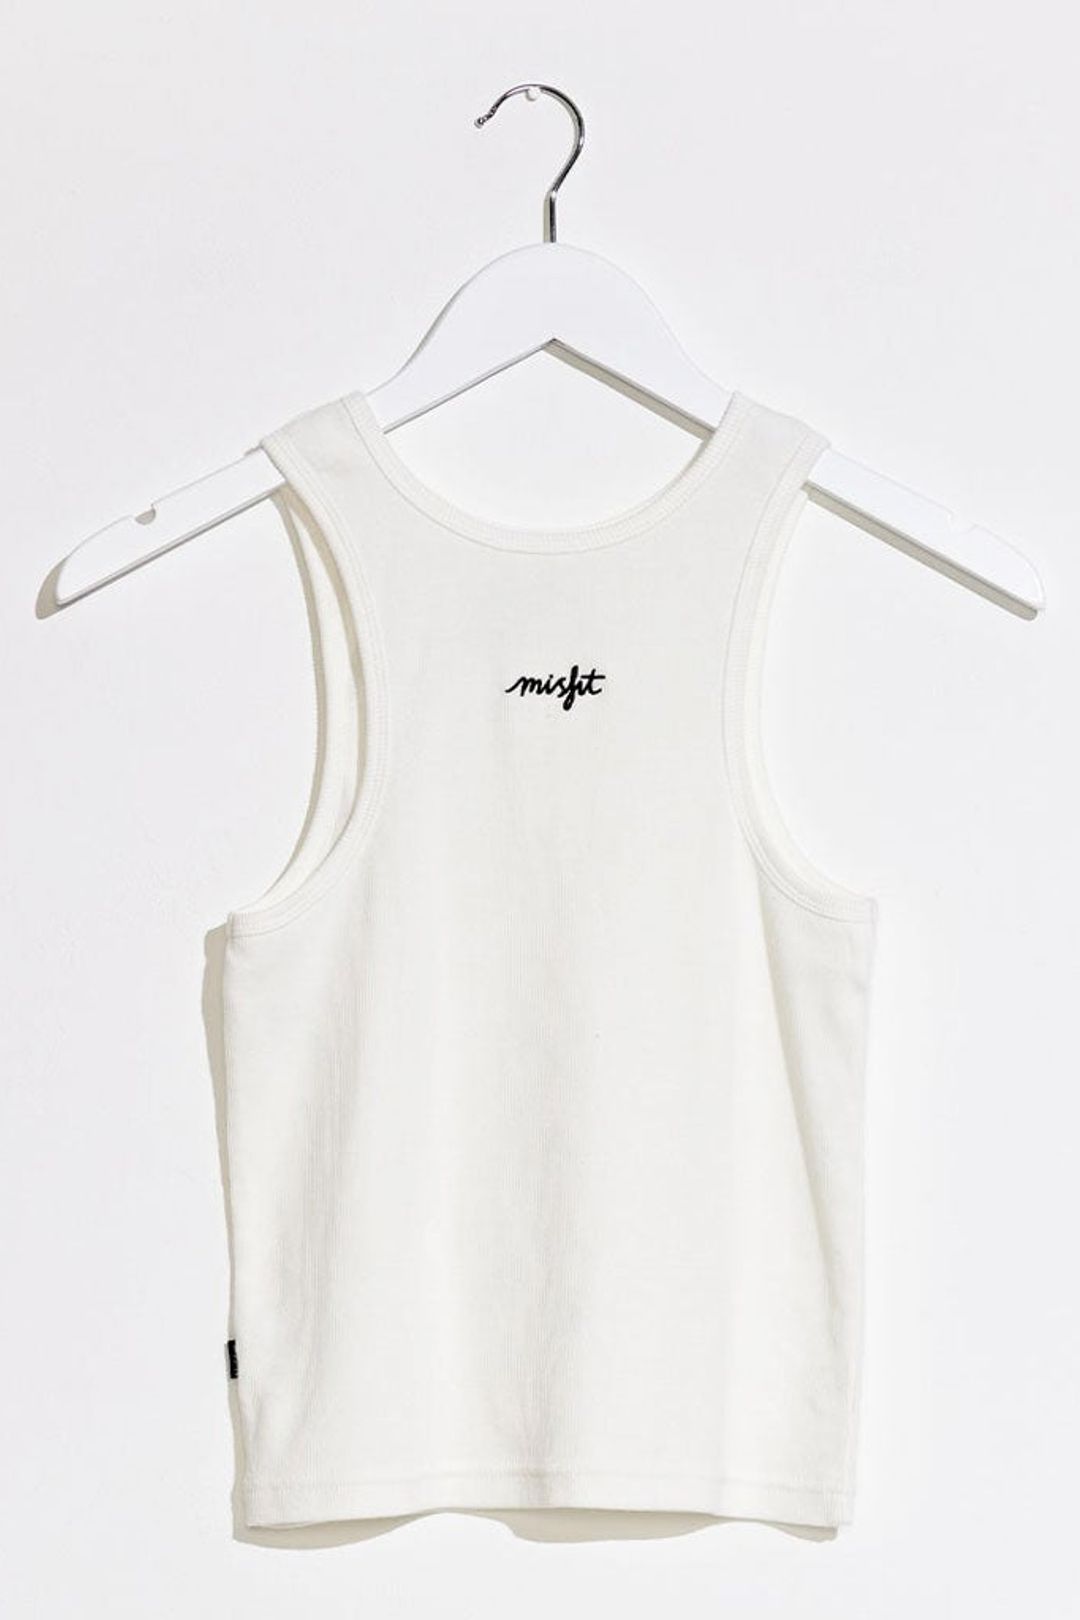 Misfit the delicate singlet - washed white